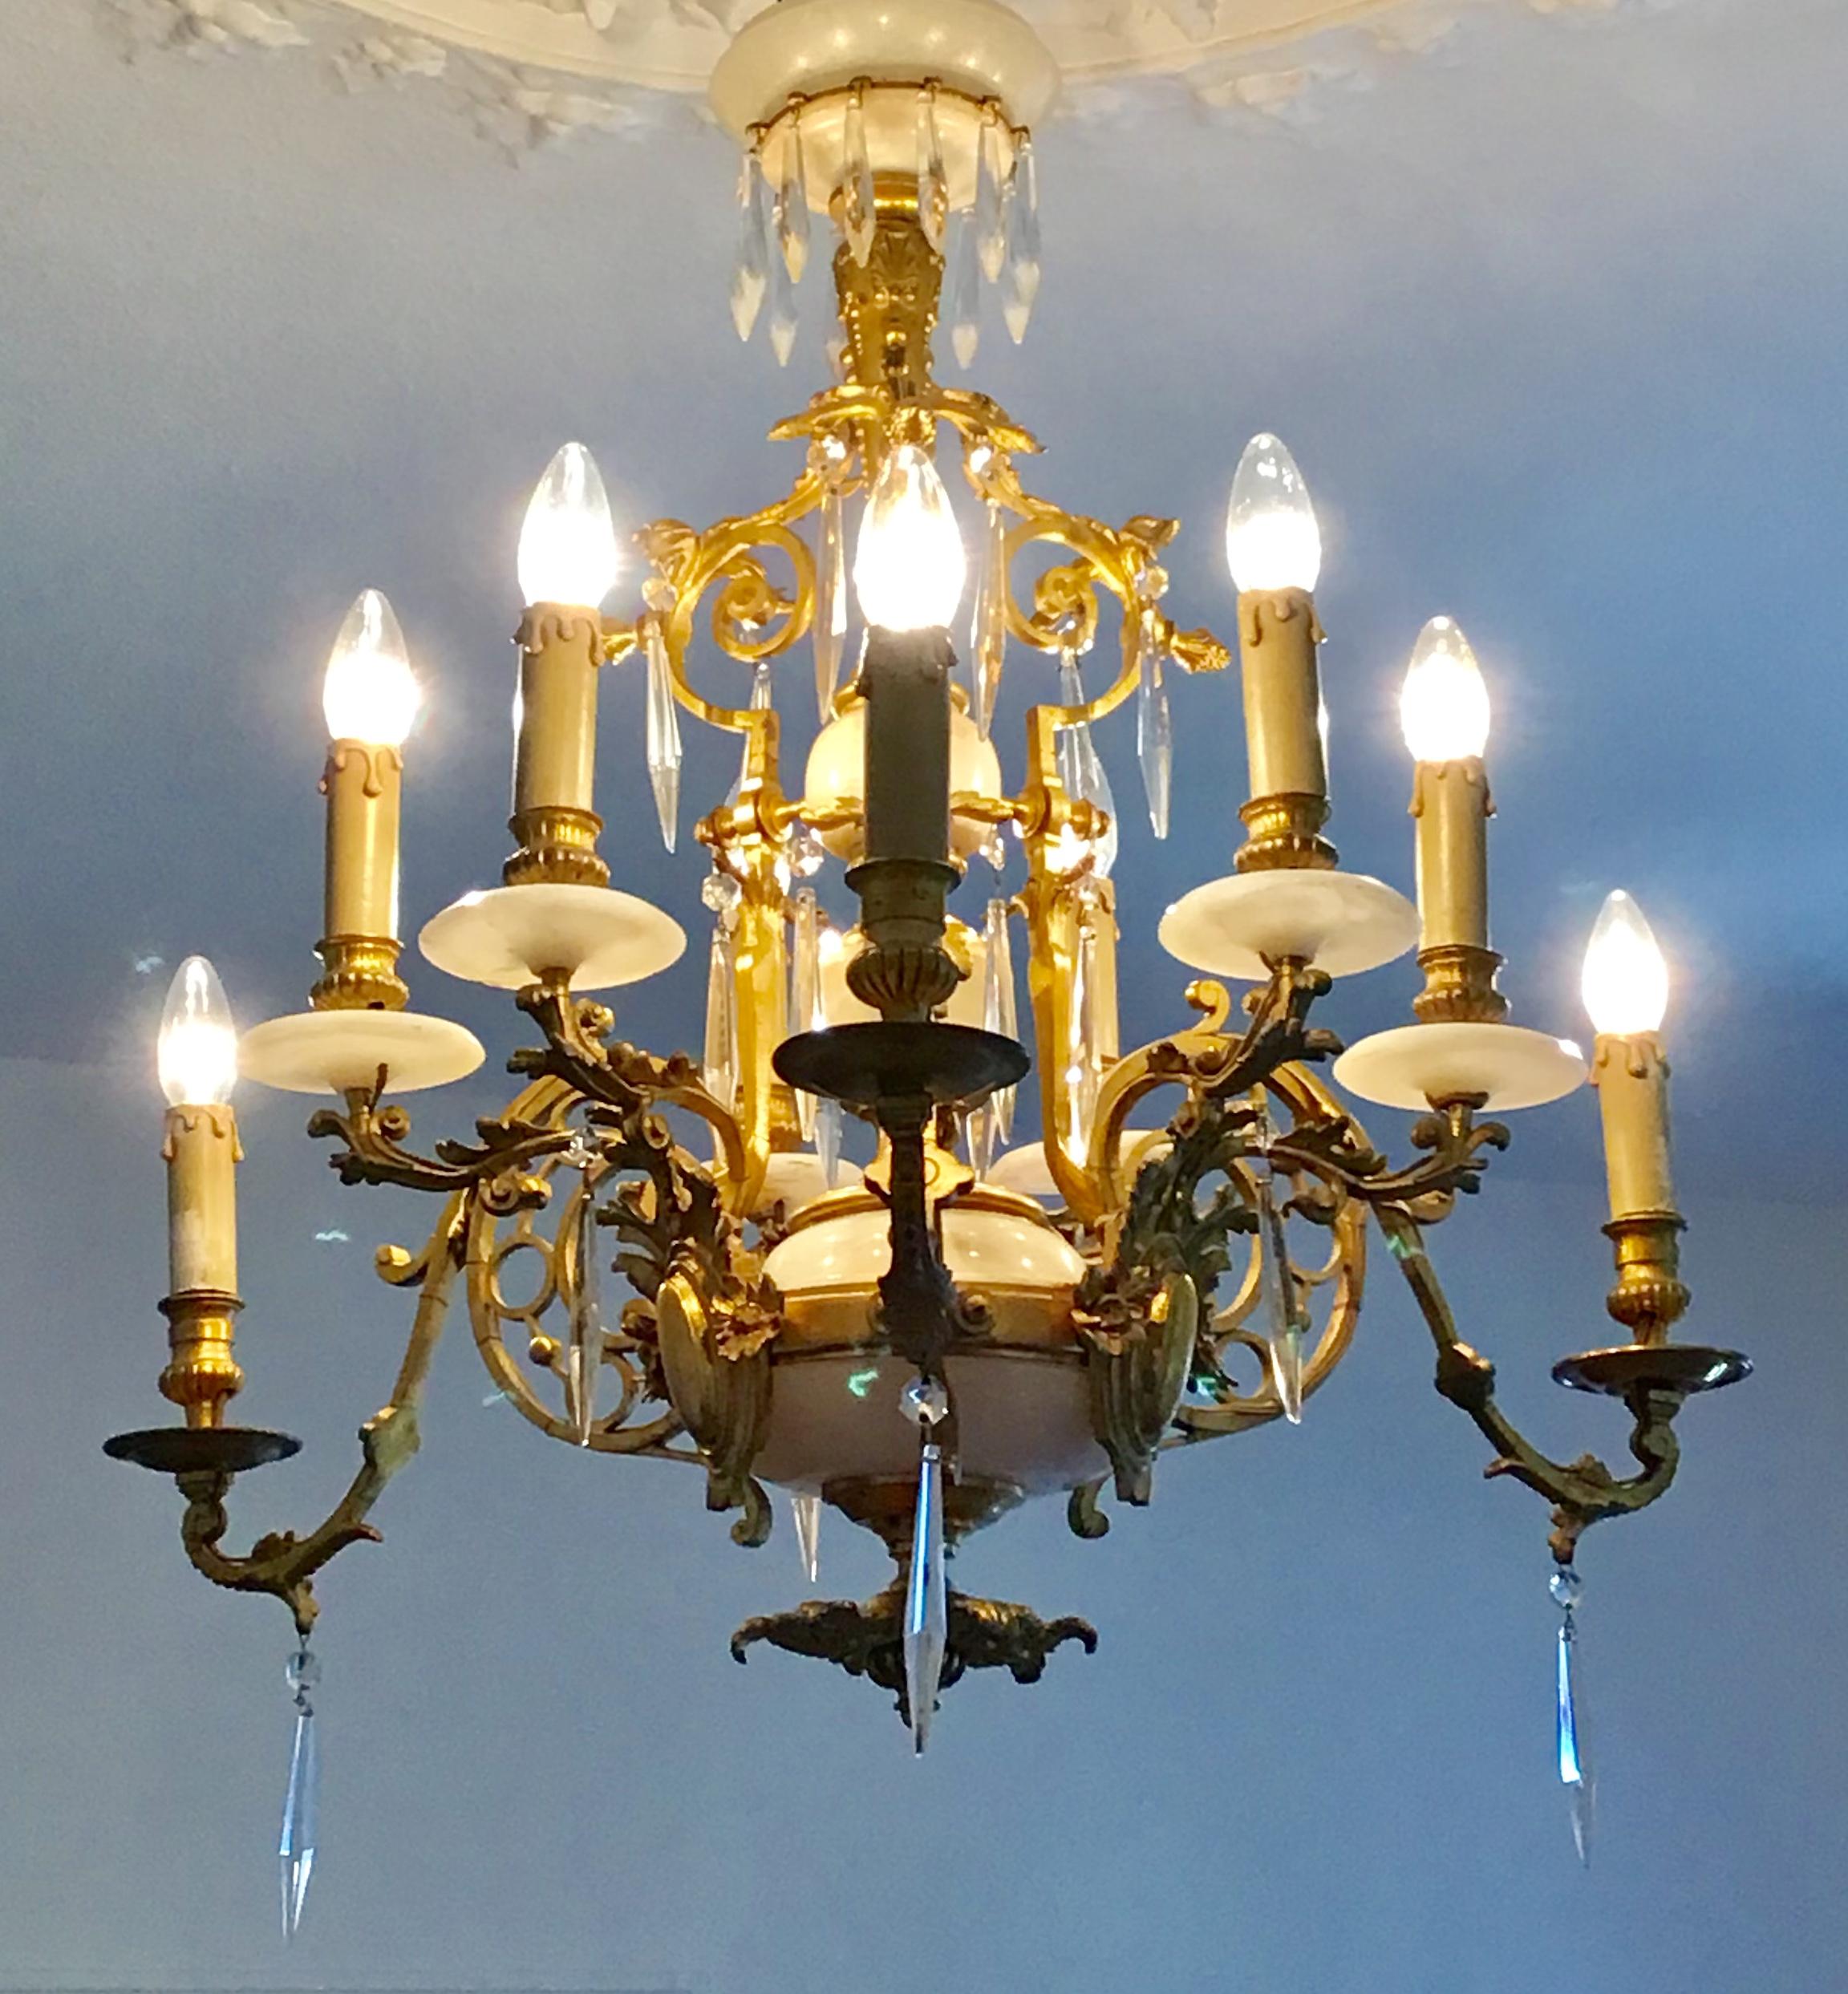 Antique, French, nine-light gilt bronze and marble chandelier in the style of Louis XVI, France circa 1850s-1880s.
This amazing chandelier is made of marble and solid gilt bronze (very rich in details) and has been electrified in the 20th for e 14